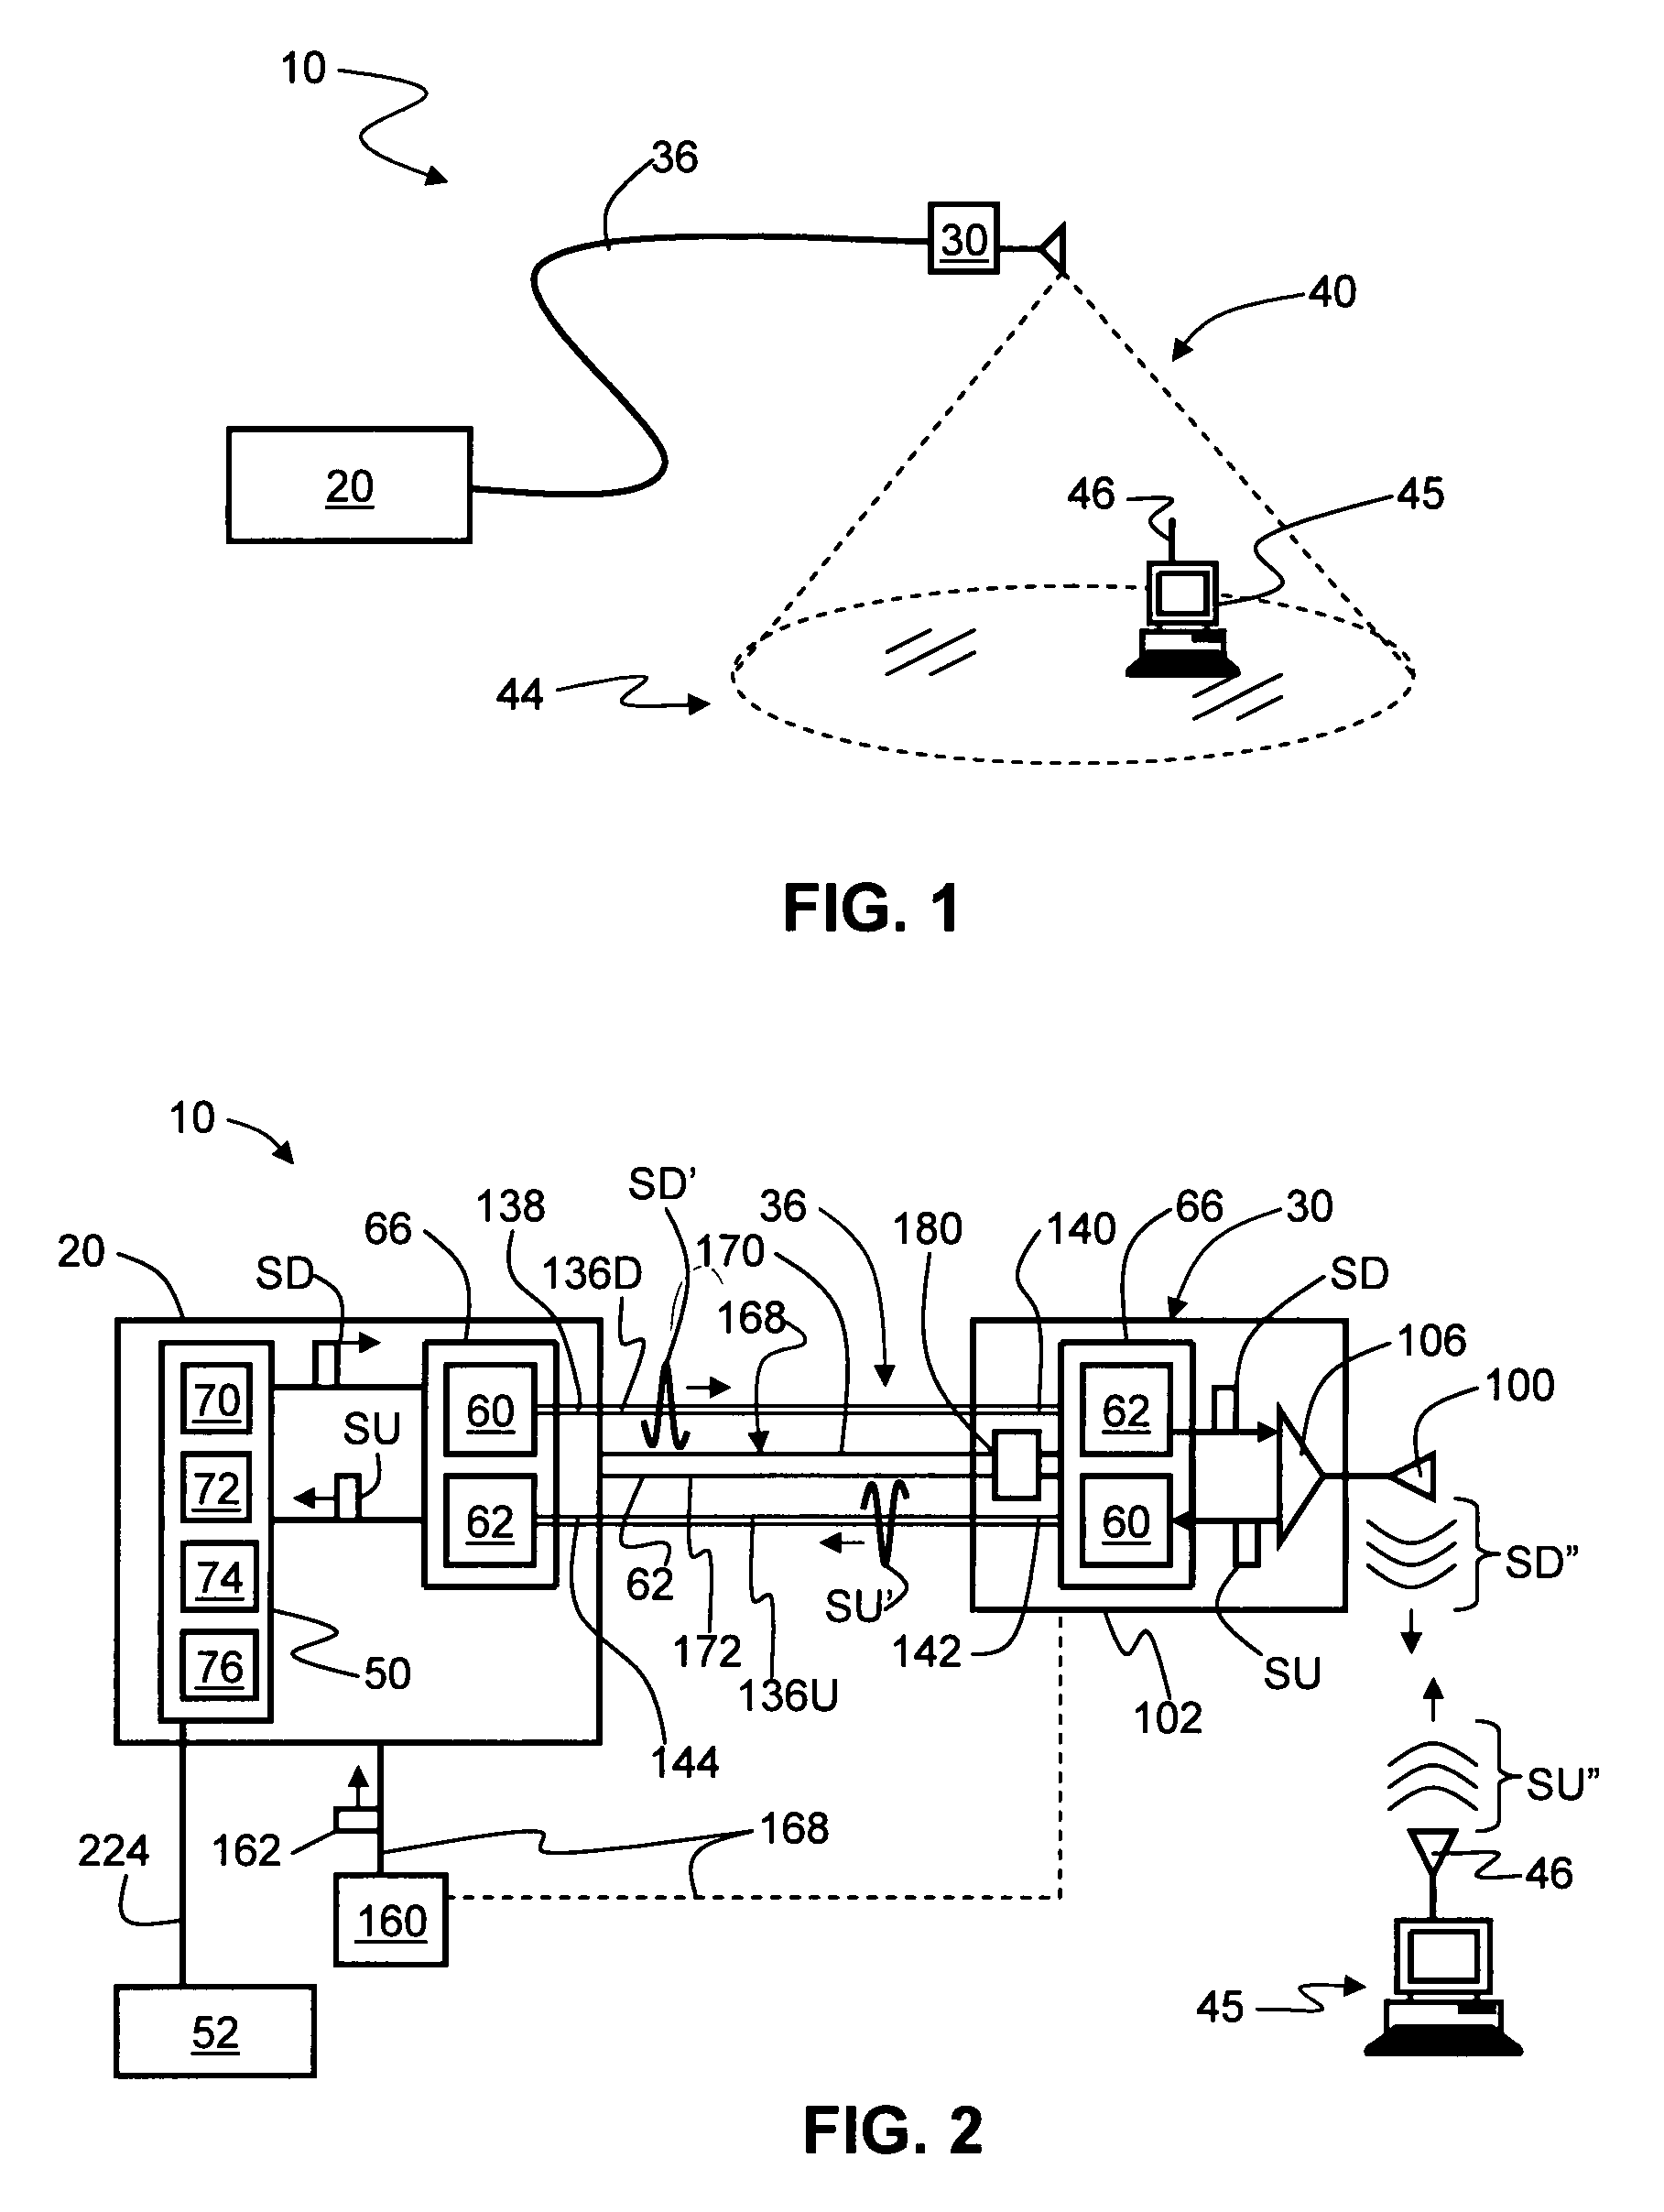 Transponder systems and methods for radio-over-fiber (RoF) wireless picocellular systems